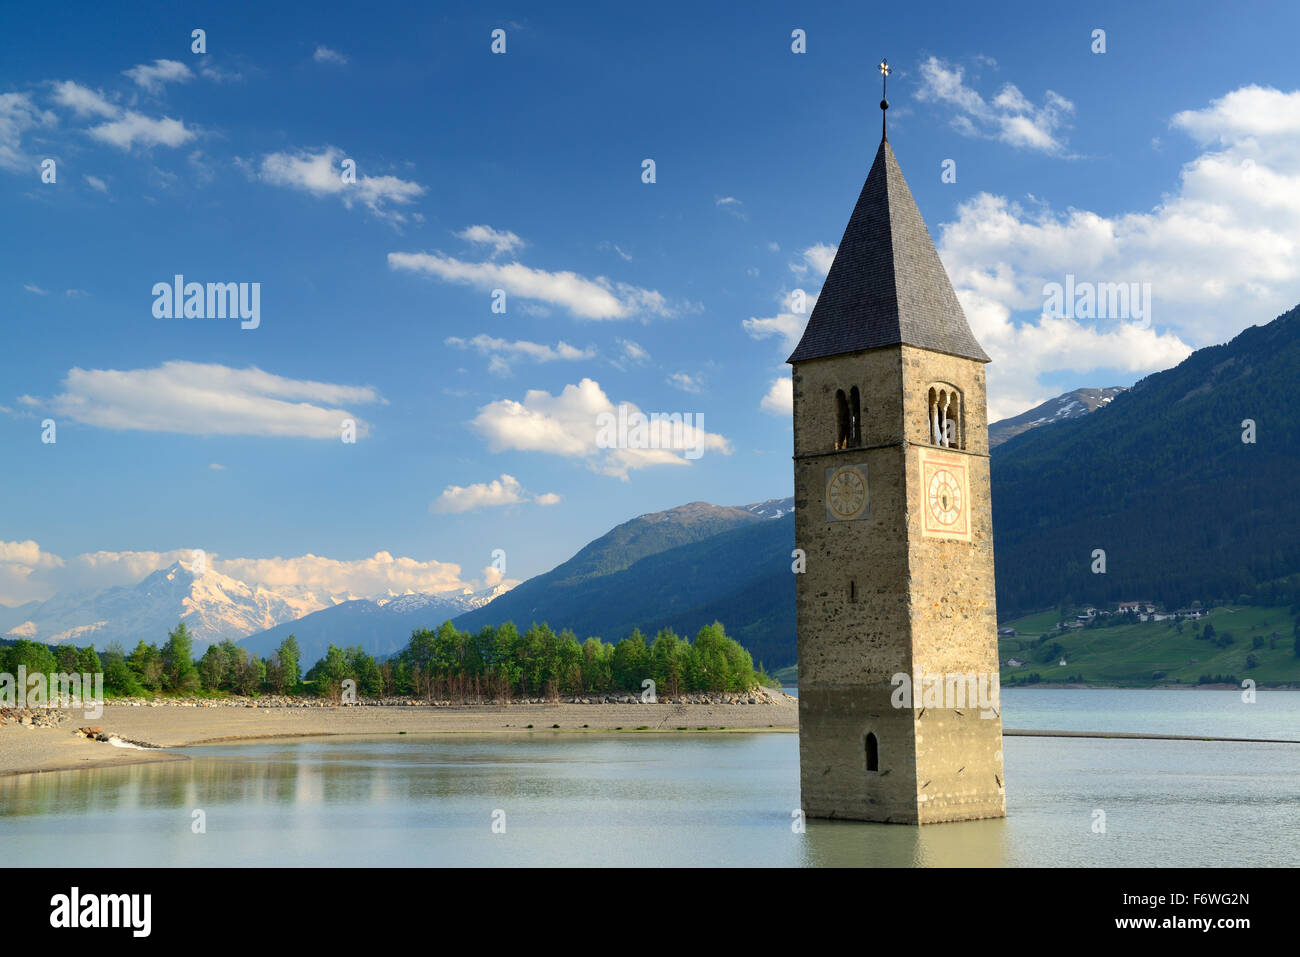 Bell tower in lake Reschensee, Ortler in the background, Reschen, lake Reschensee, Reschen Pass, Vinschgau, South Tyrol, Italy Stock Photo